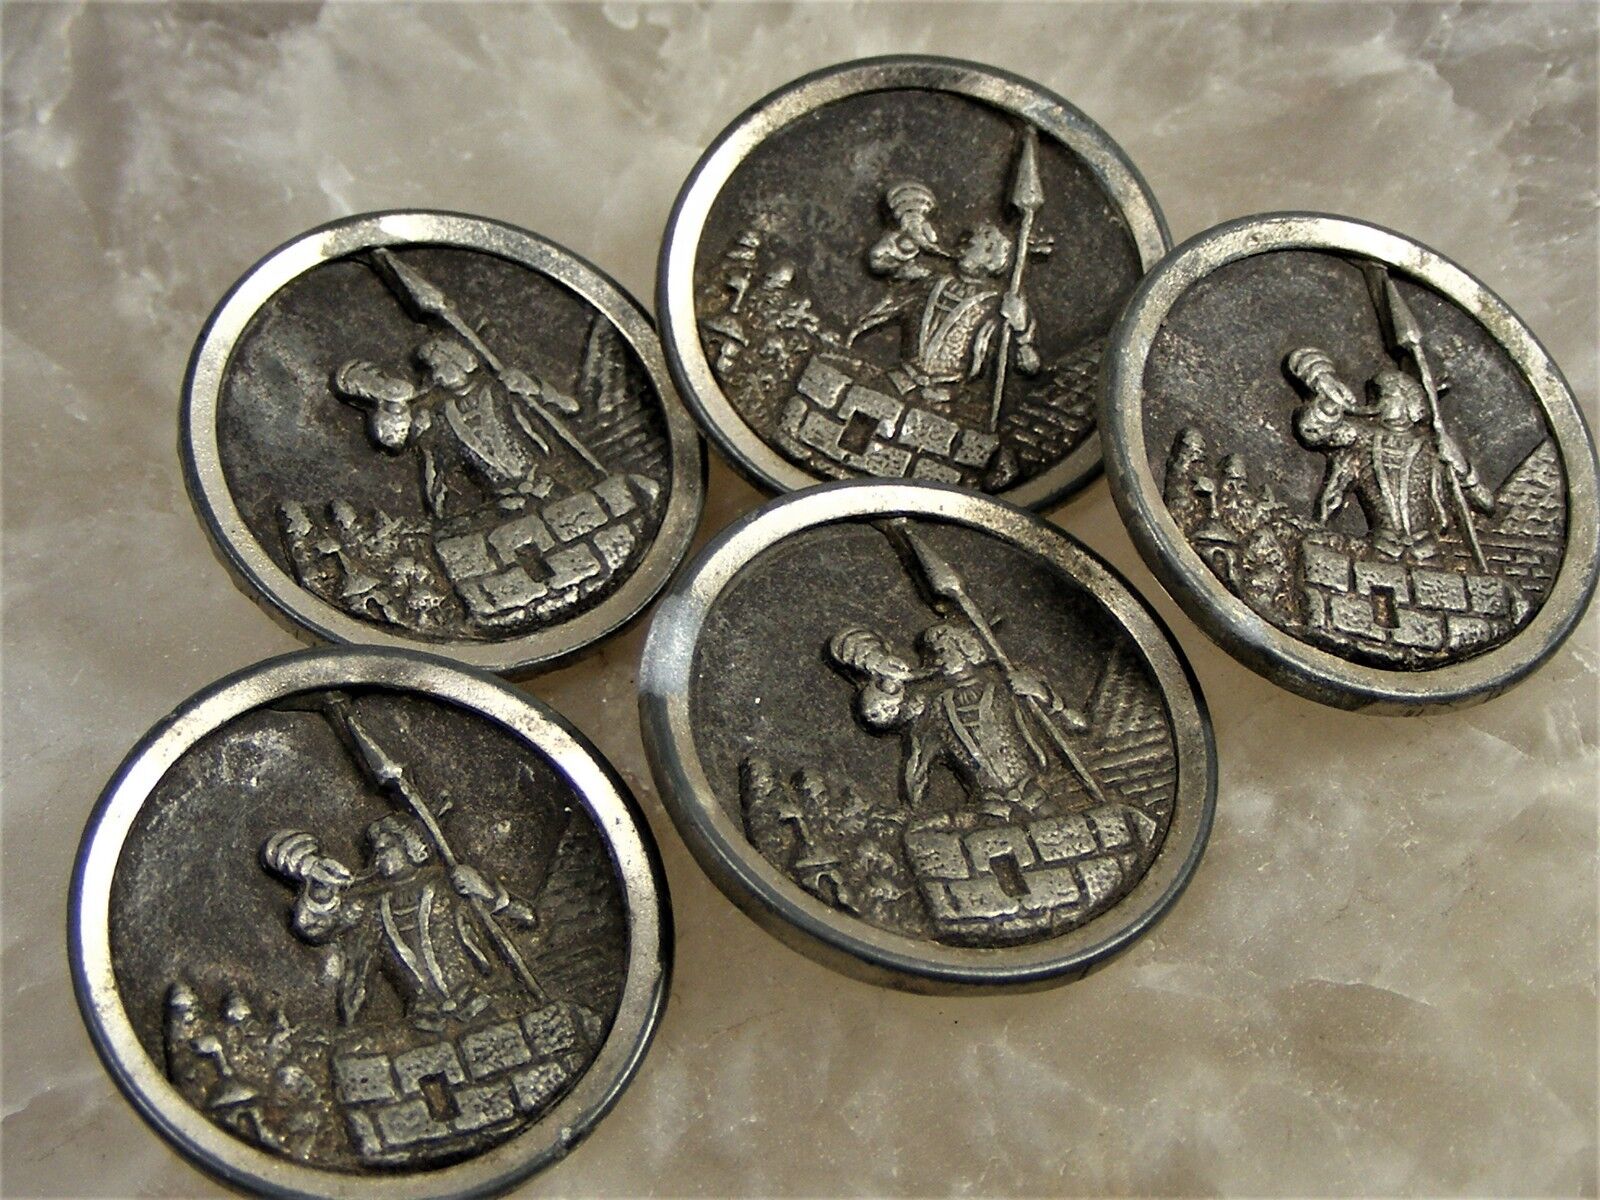 Antique Brass & Pewter Coat Story Book BUTTON Lot o 5 Soldier Castle Wall Spear  Без бренда - фотография #4